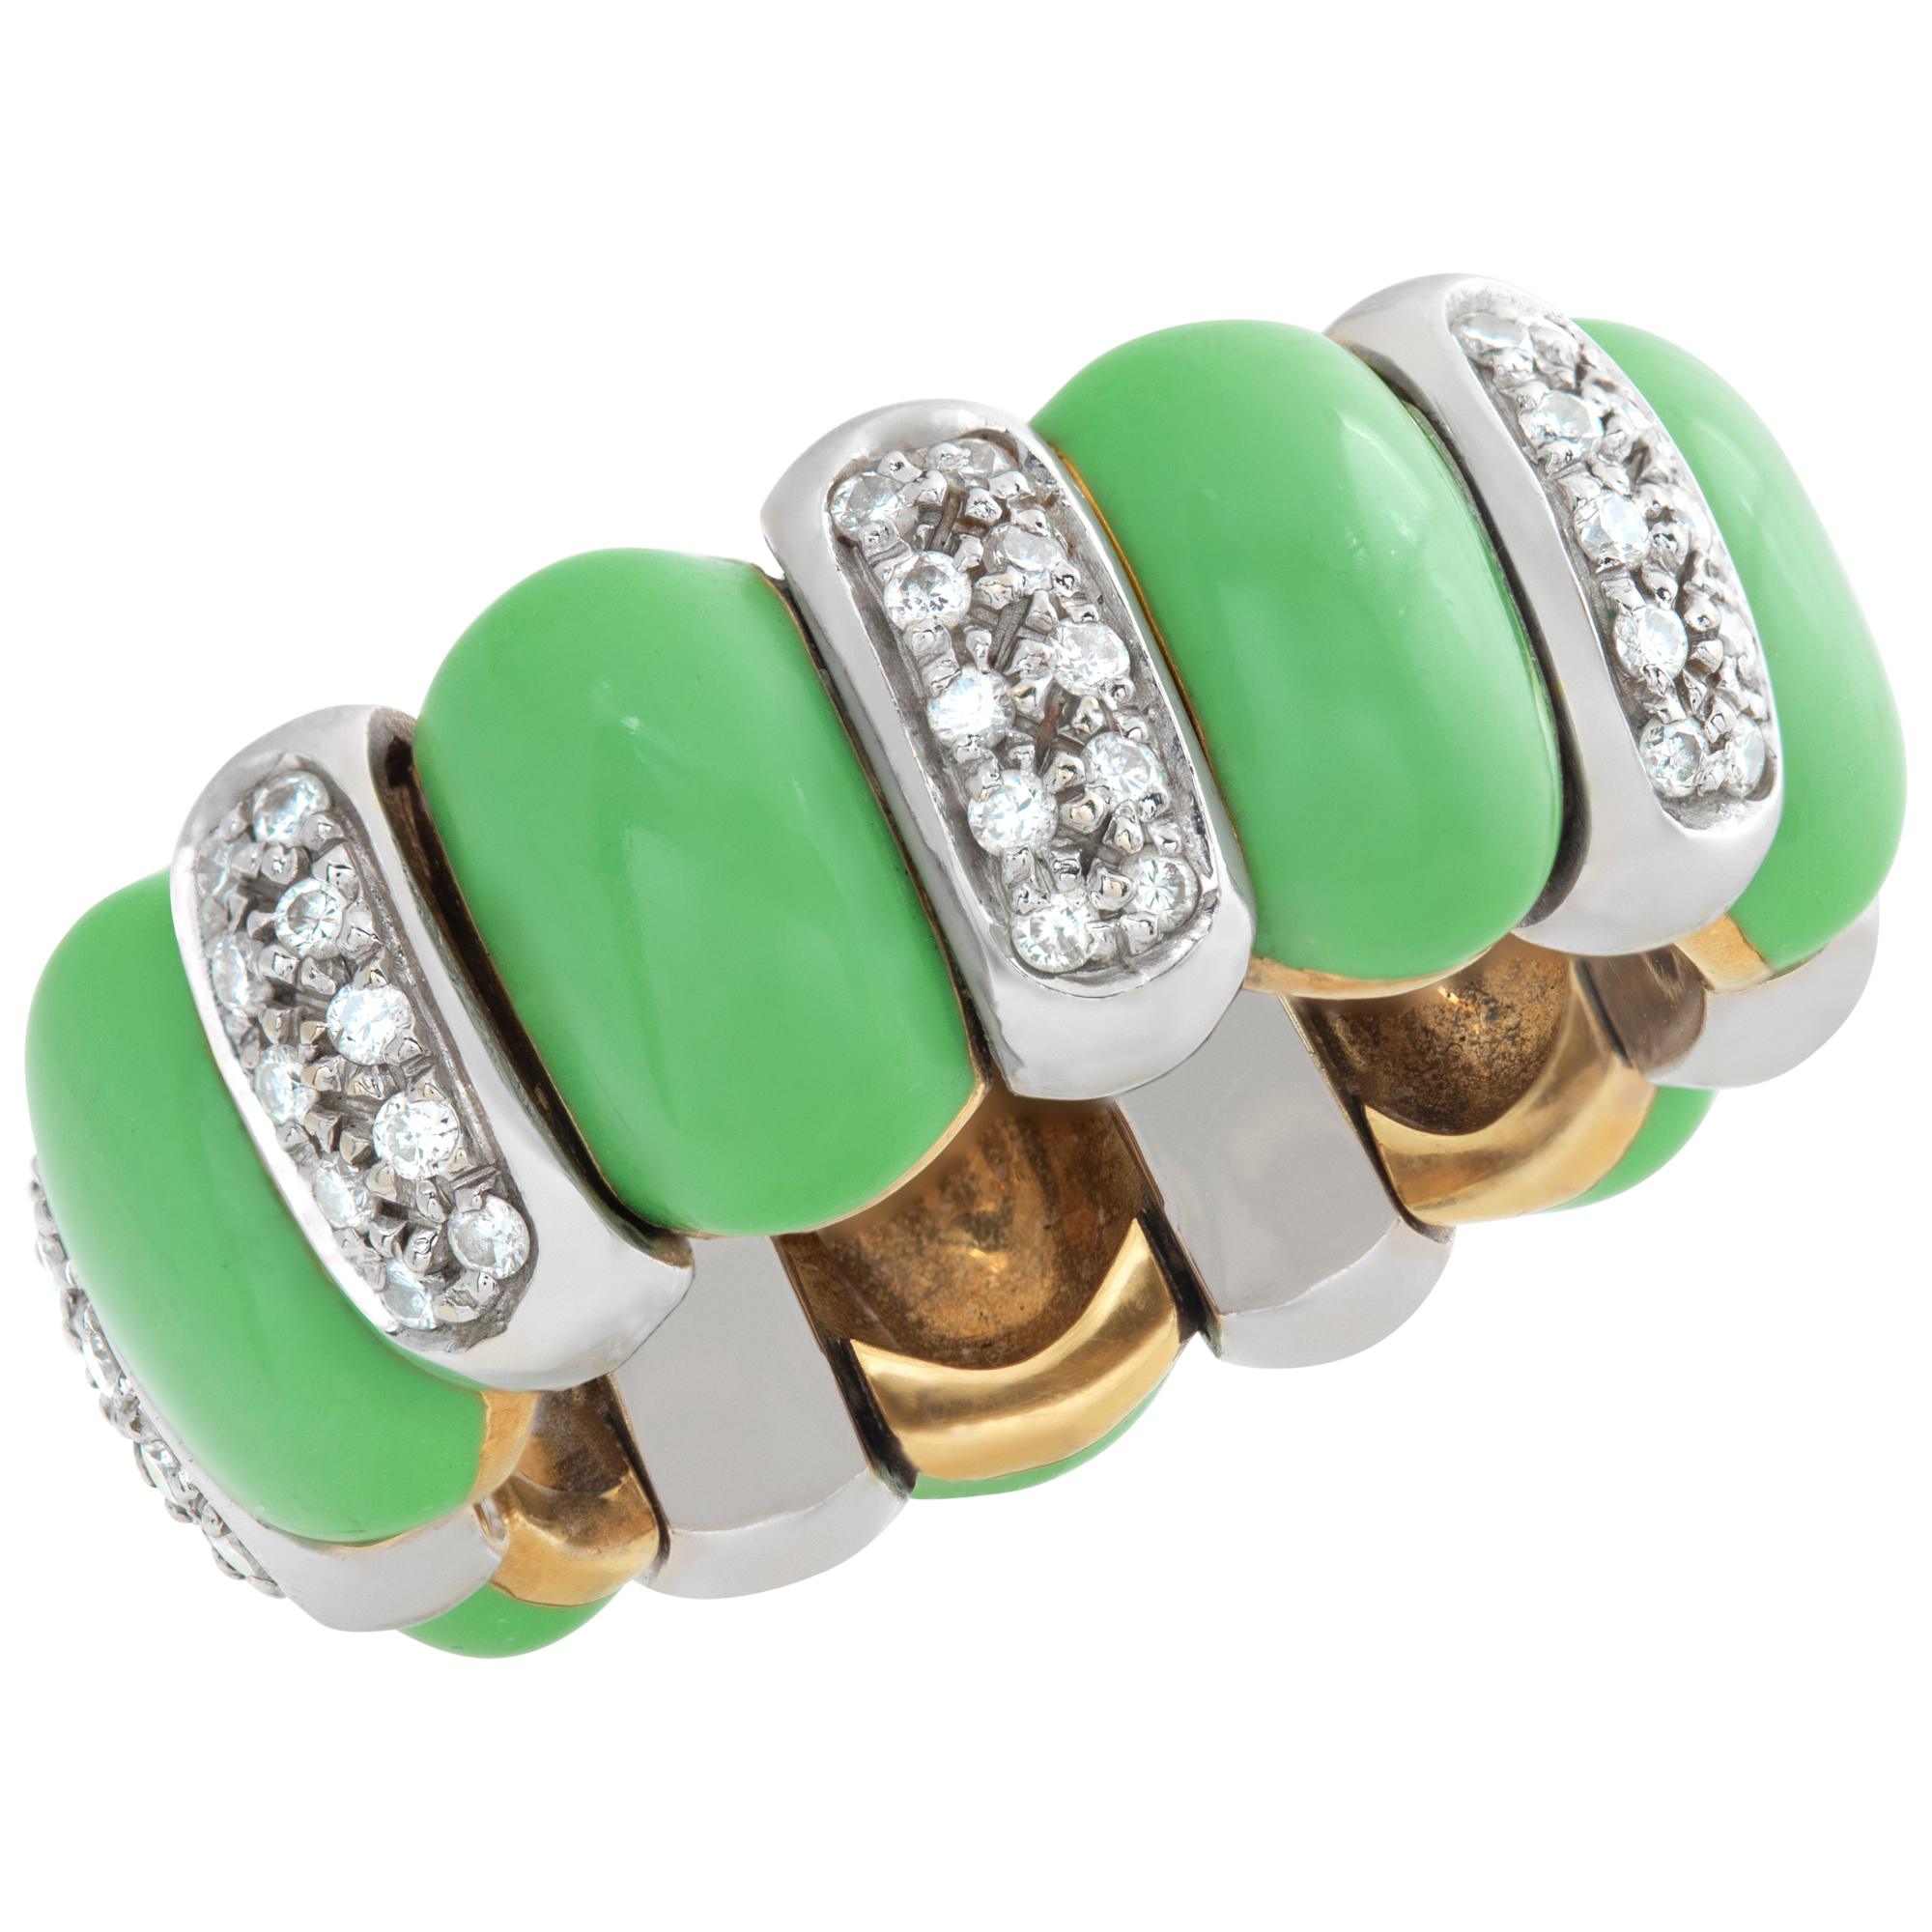 Designer signed "Valent" flexible eternity band with diamonds and cabochon green turquoise set in 18K white & yellow gold. image 3